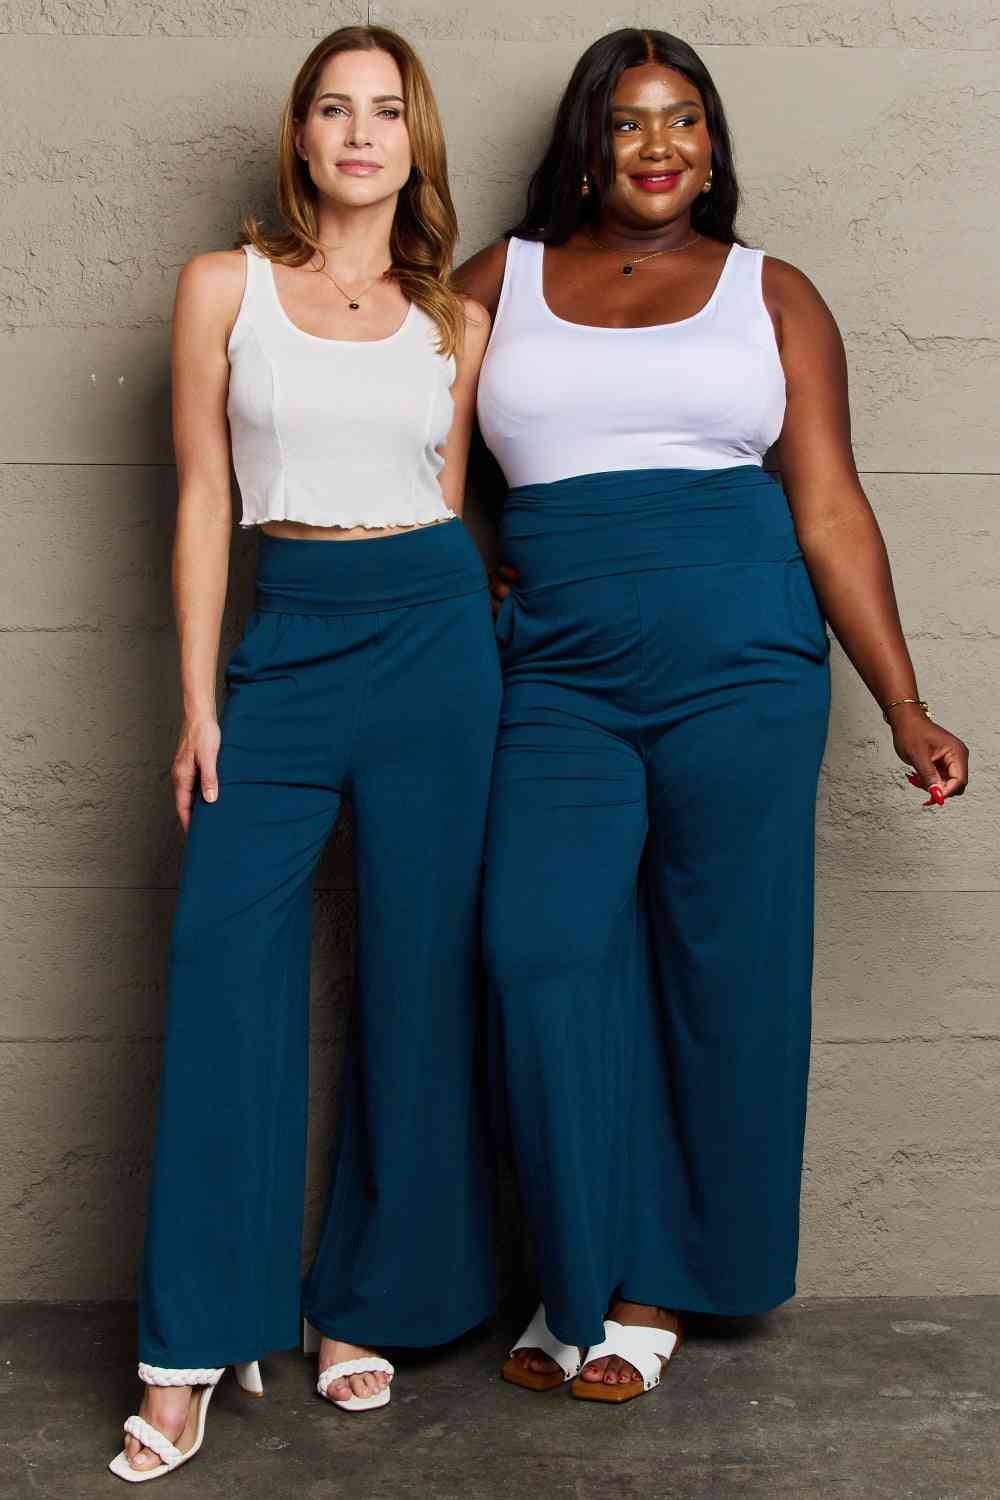 My Best Wish Full Size High Waisted Palazzo Pants